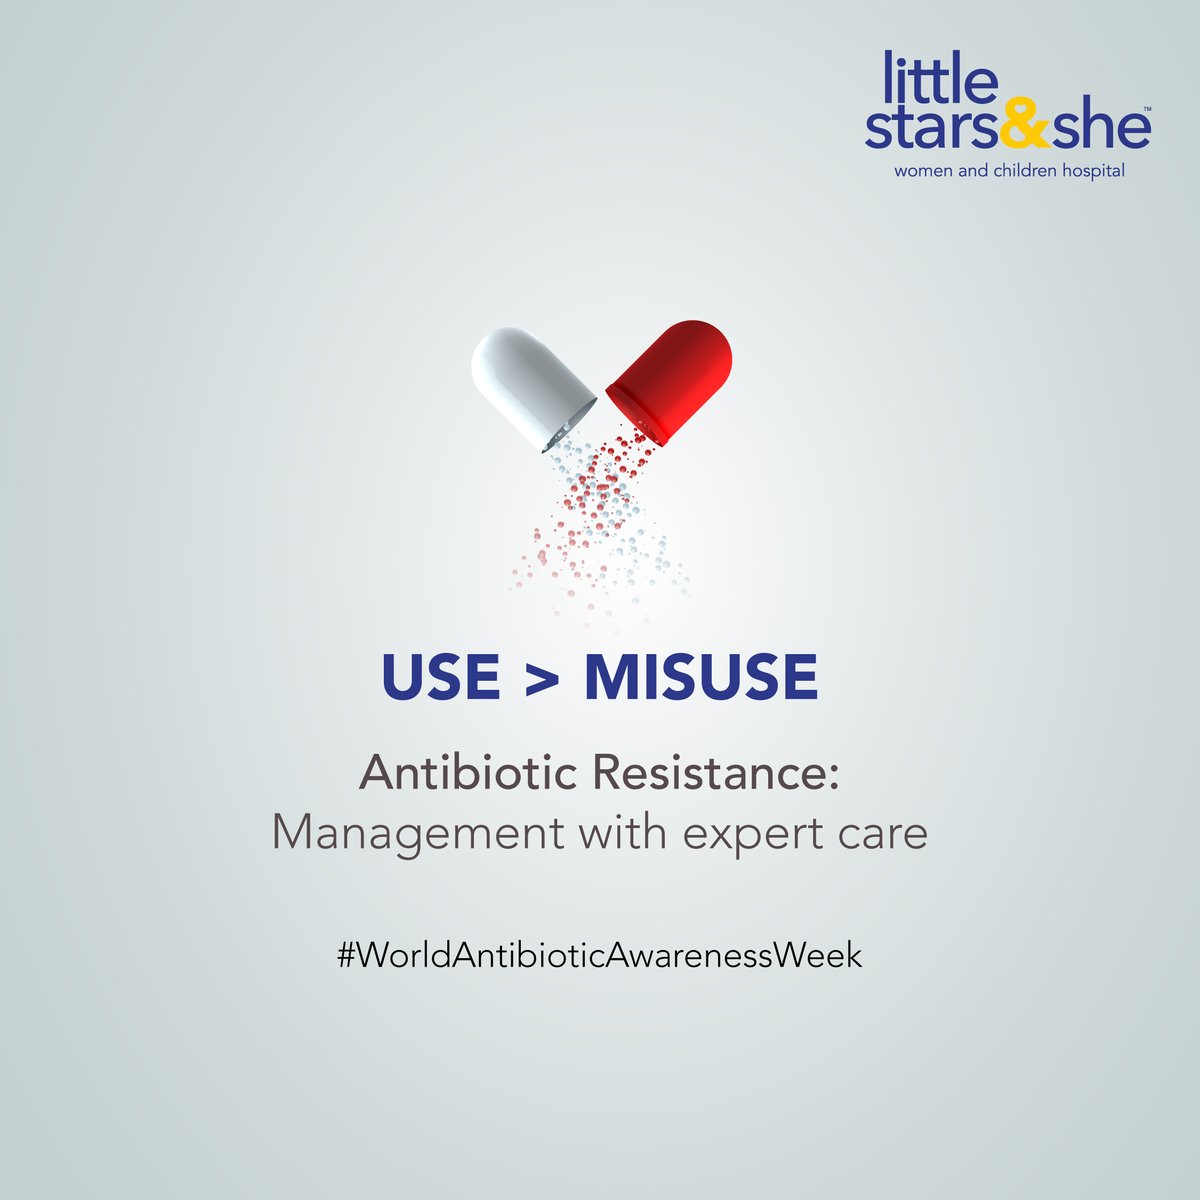 Misusing antibiotics can lead to resistance, but with proper use and expert care, we can protect our children's health.

#littlestarsandshe #antibioticawareness #AntibioticAwarenessWeek #AntibioticResistance #ChildrensCare #WomensCare #Healthcare #Maternity #Pregnancy